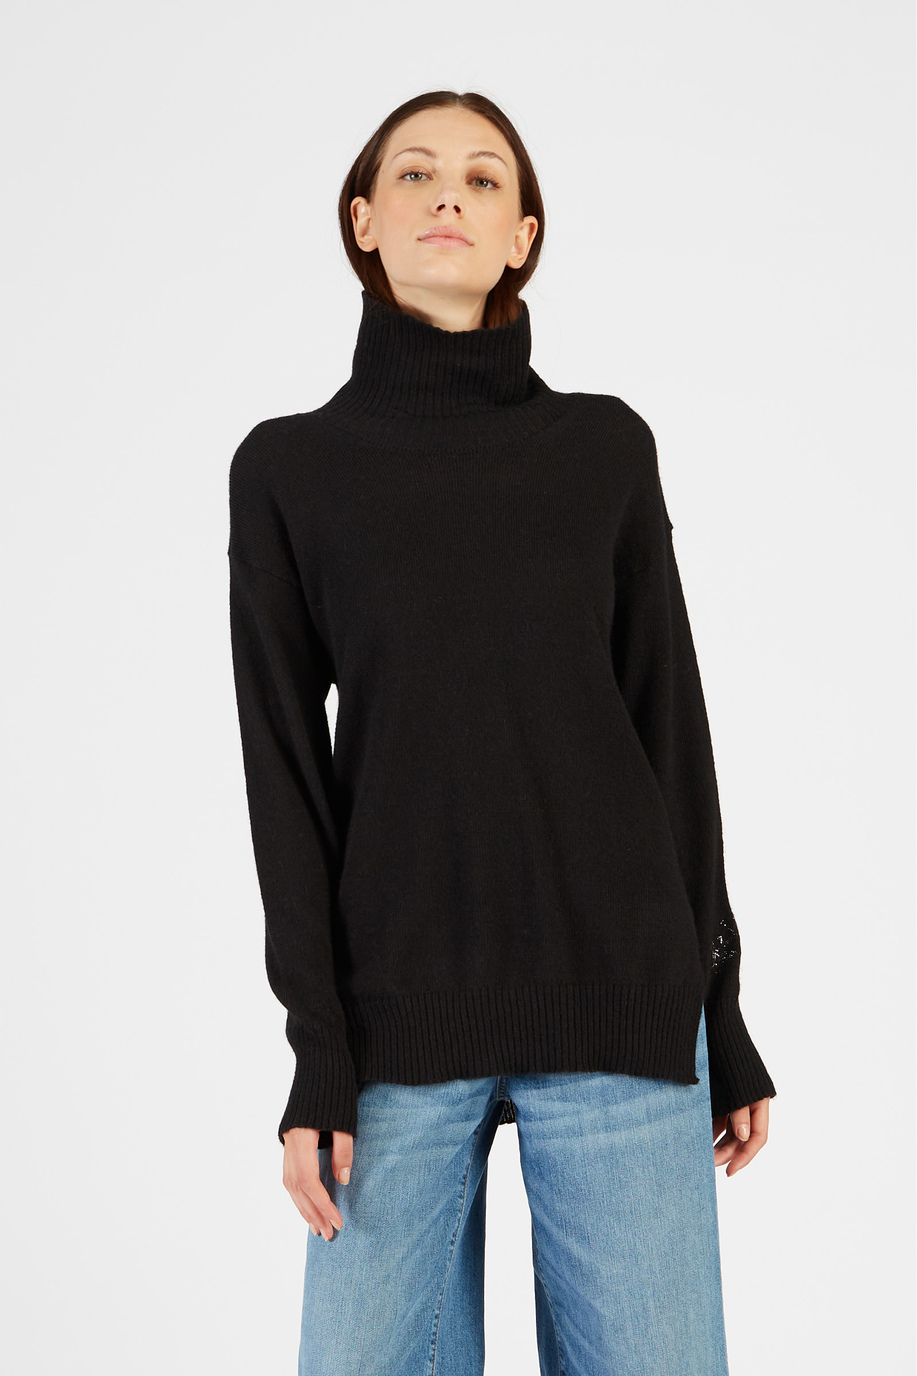 Women’s high neck sweater in alpaca regular fit - Party season for her | La Martina - Official Online Shop